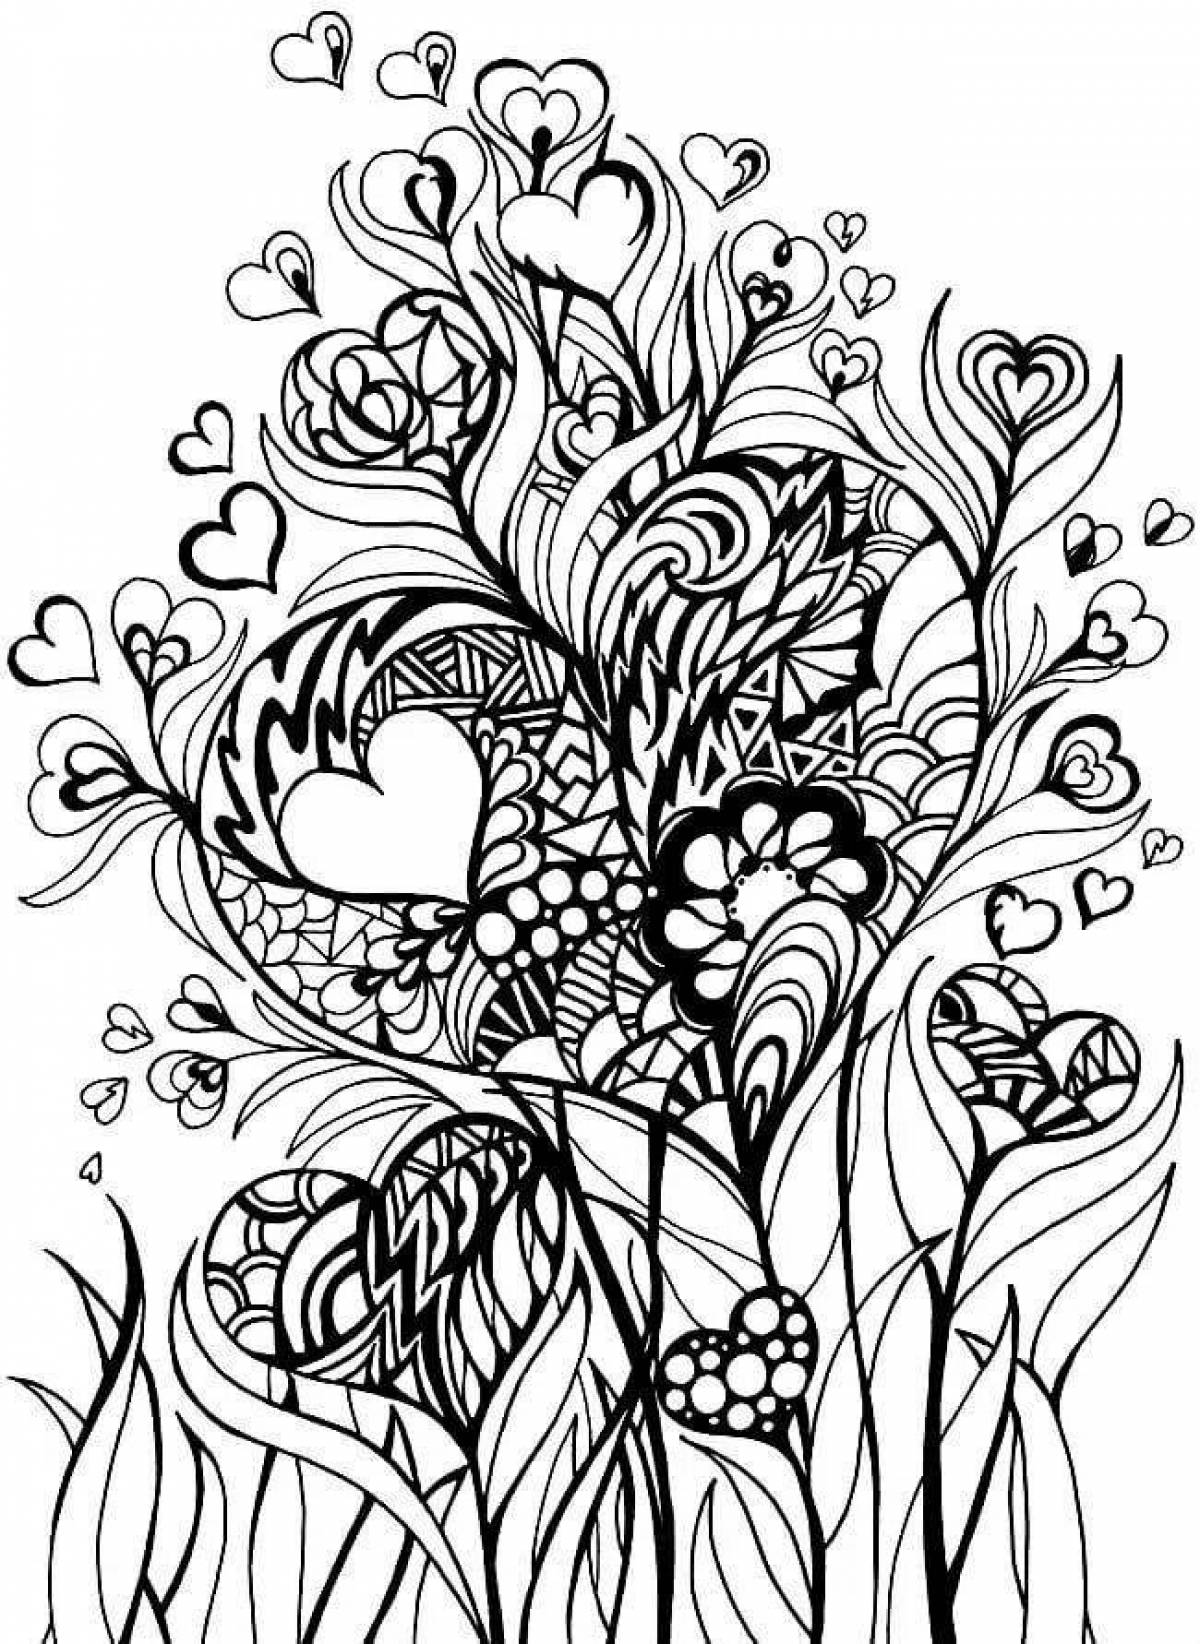 Intriguing complex flower coloring book